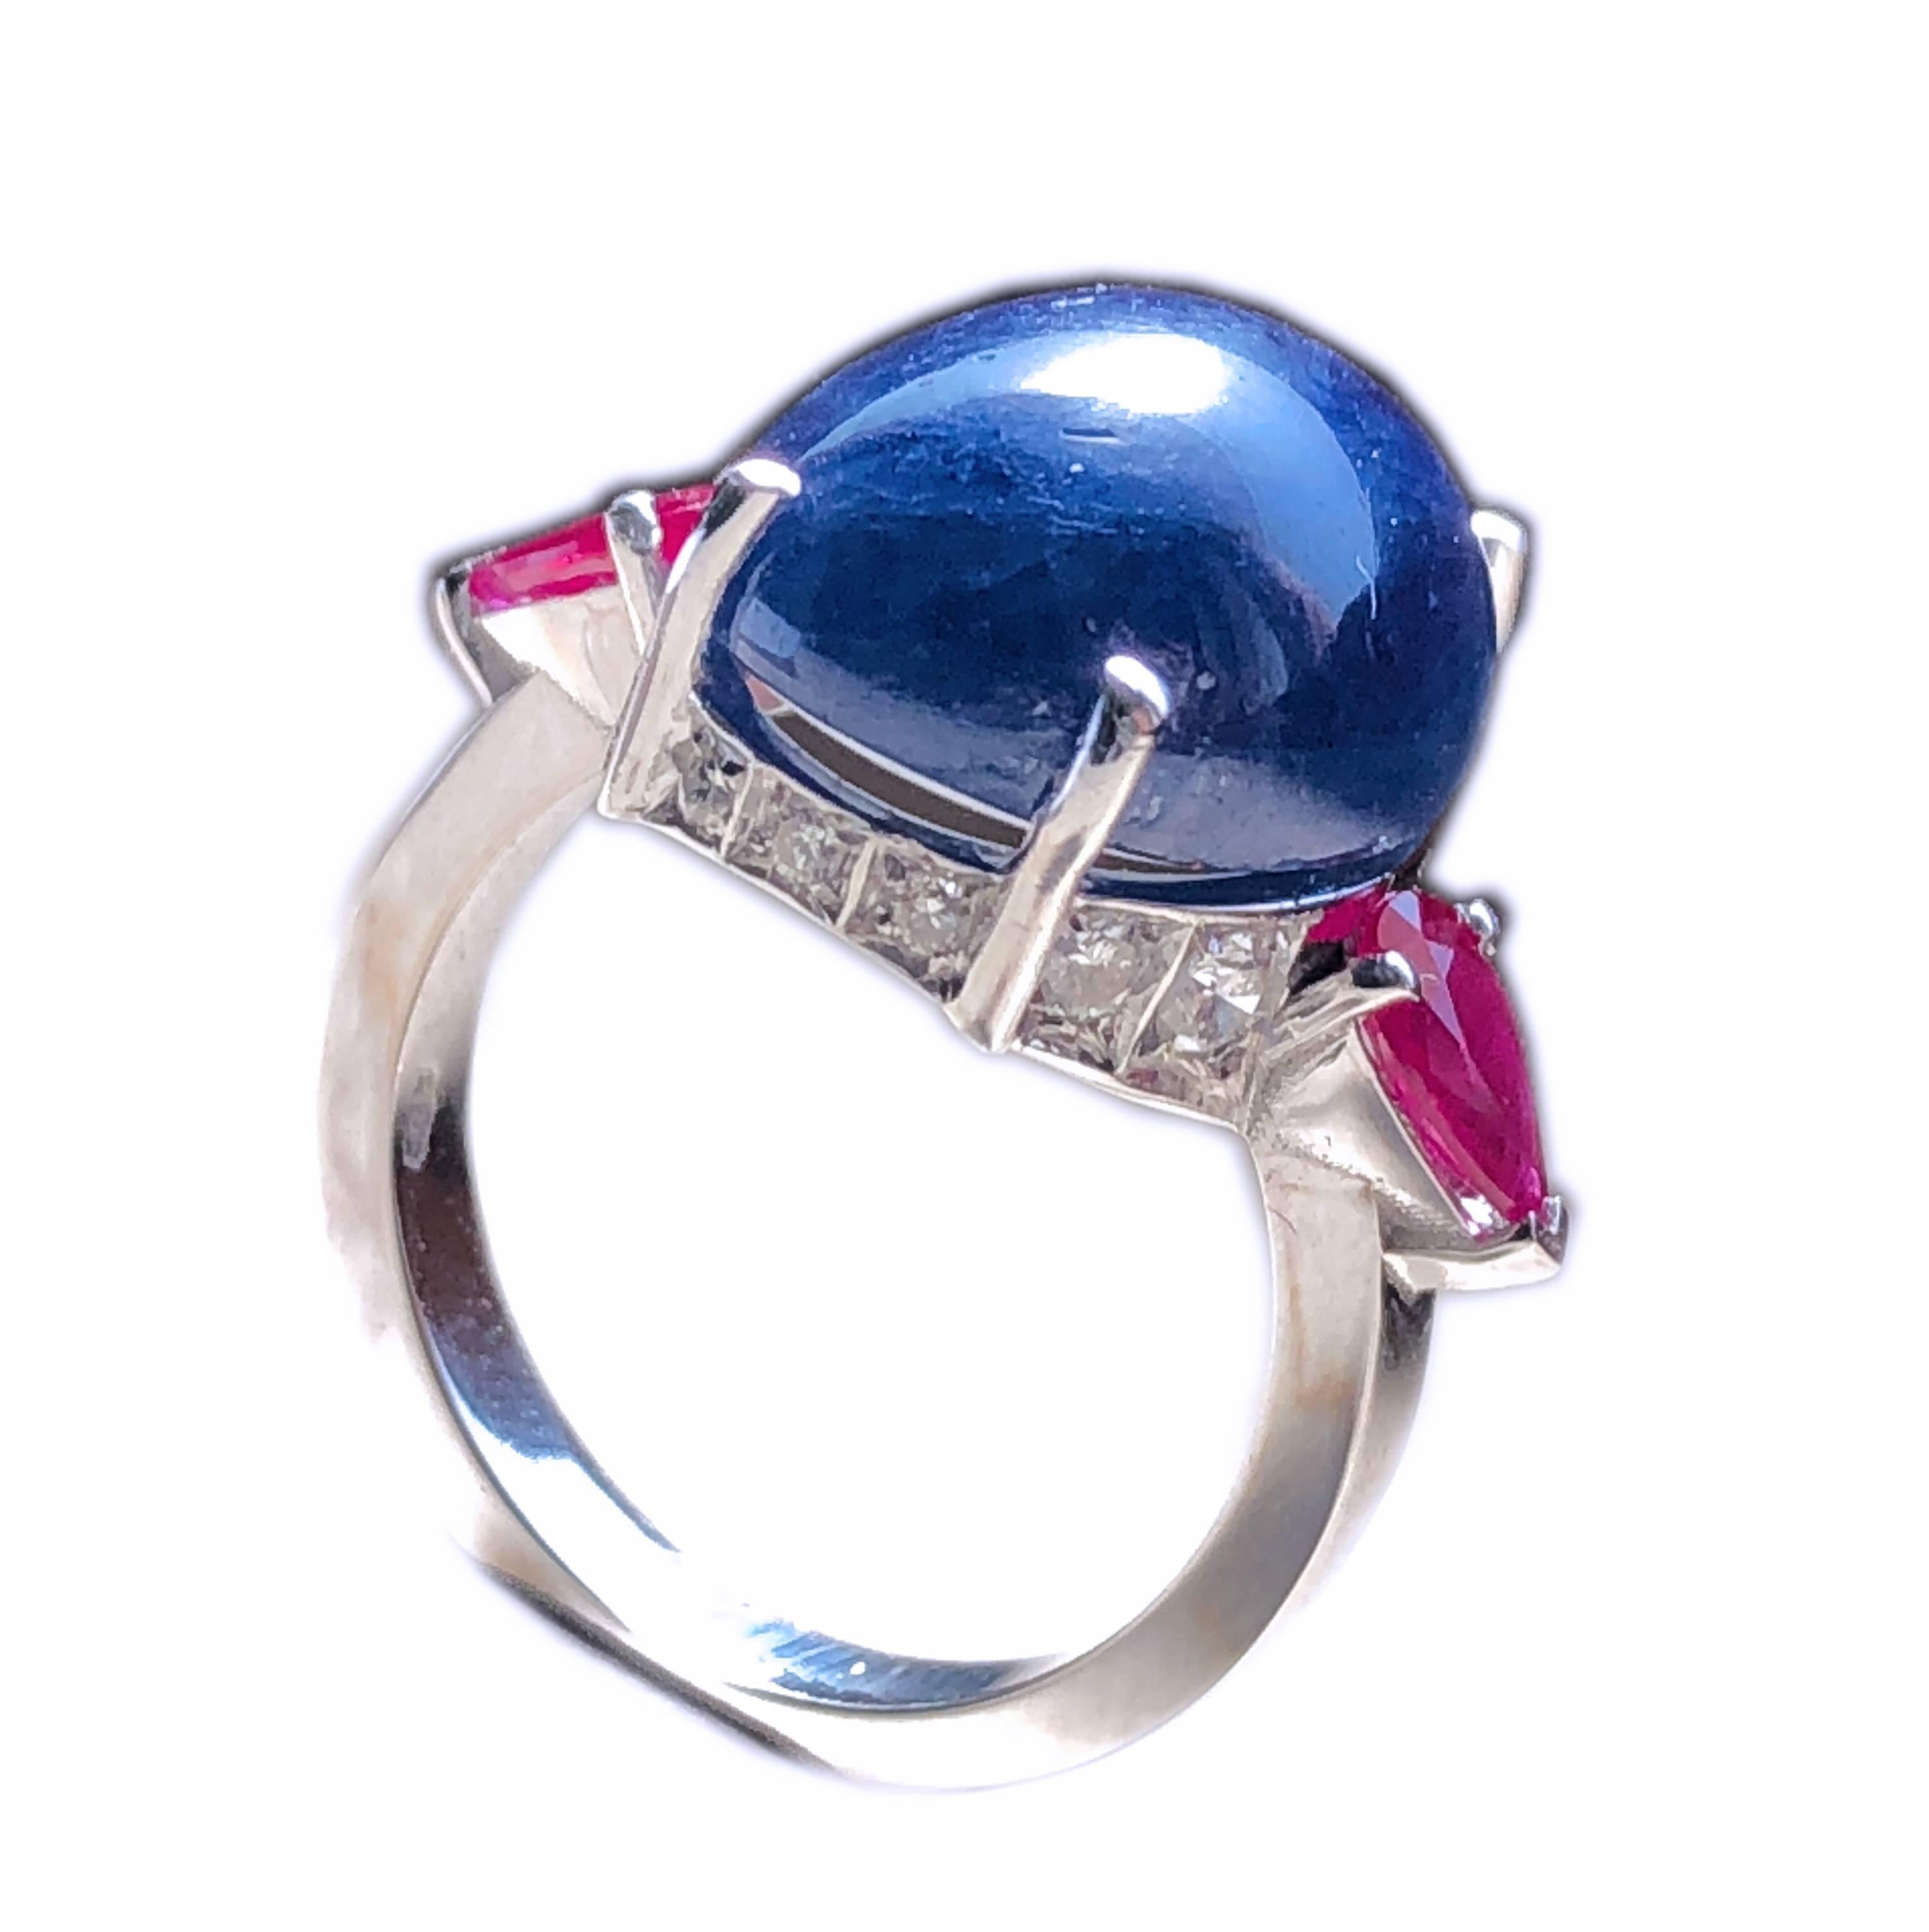 Oval Cut 16.60 Carat Natural Oval Sapphire Cabochon Diamond Ruby Cocktail Ring